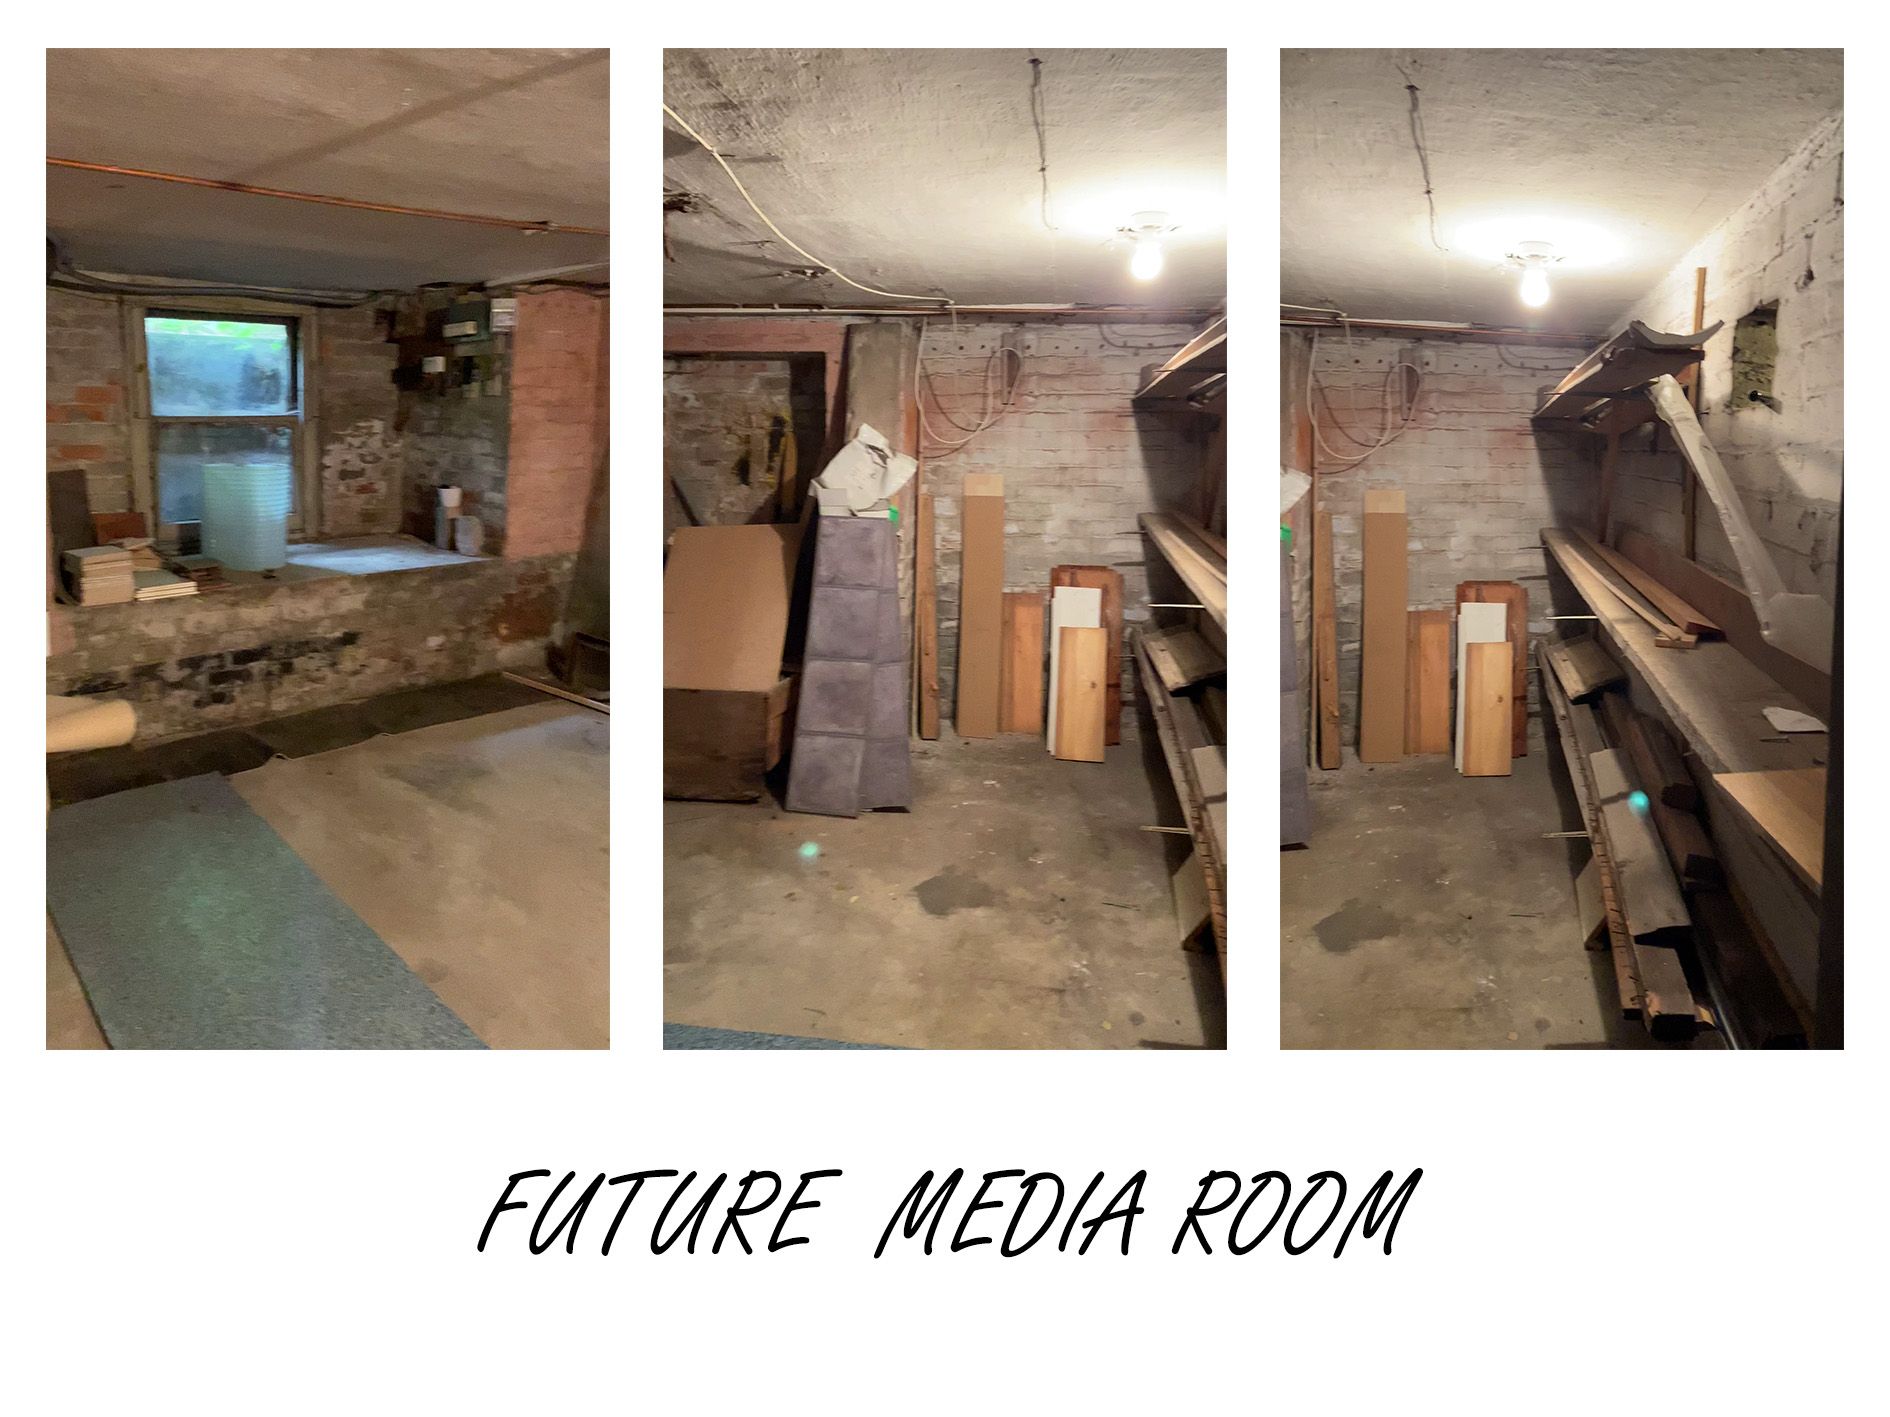 Photograph of a basement room prior to renovation